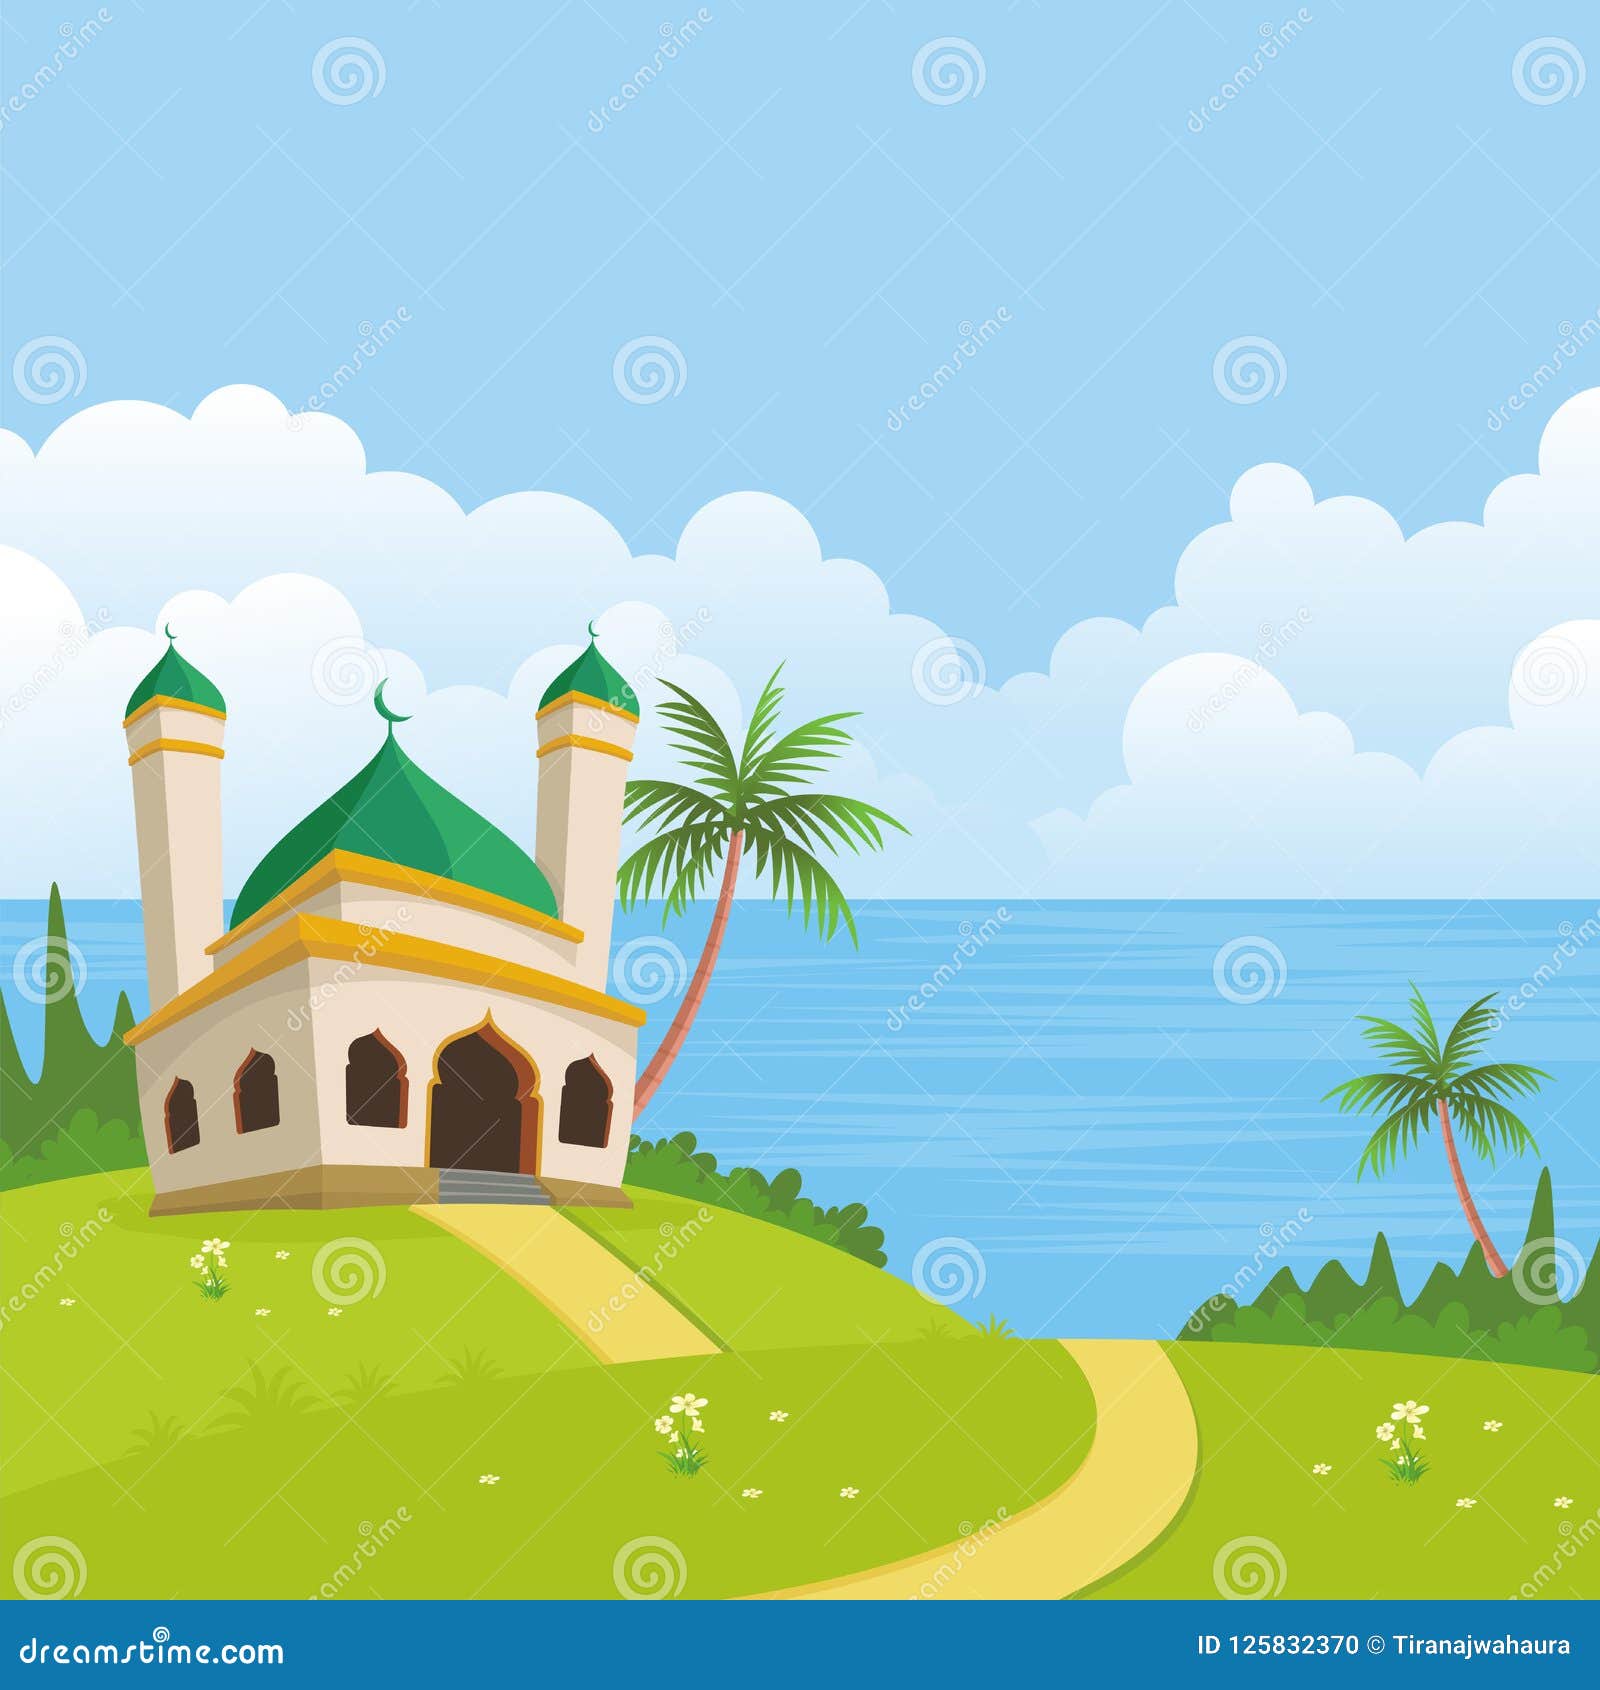 Islamic Nature Landscape With Mosque  Stock Vector 